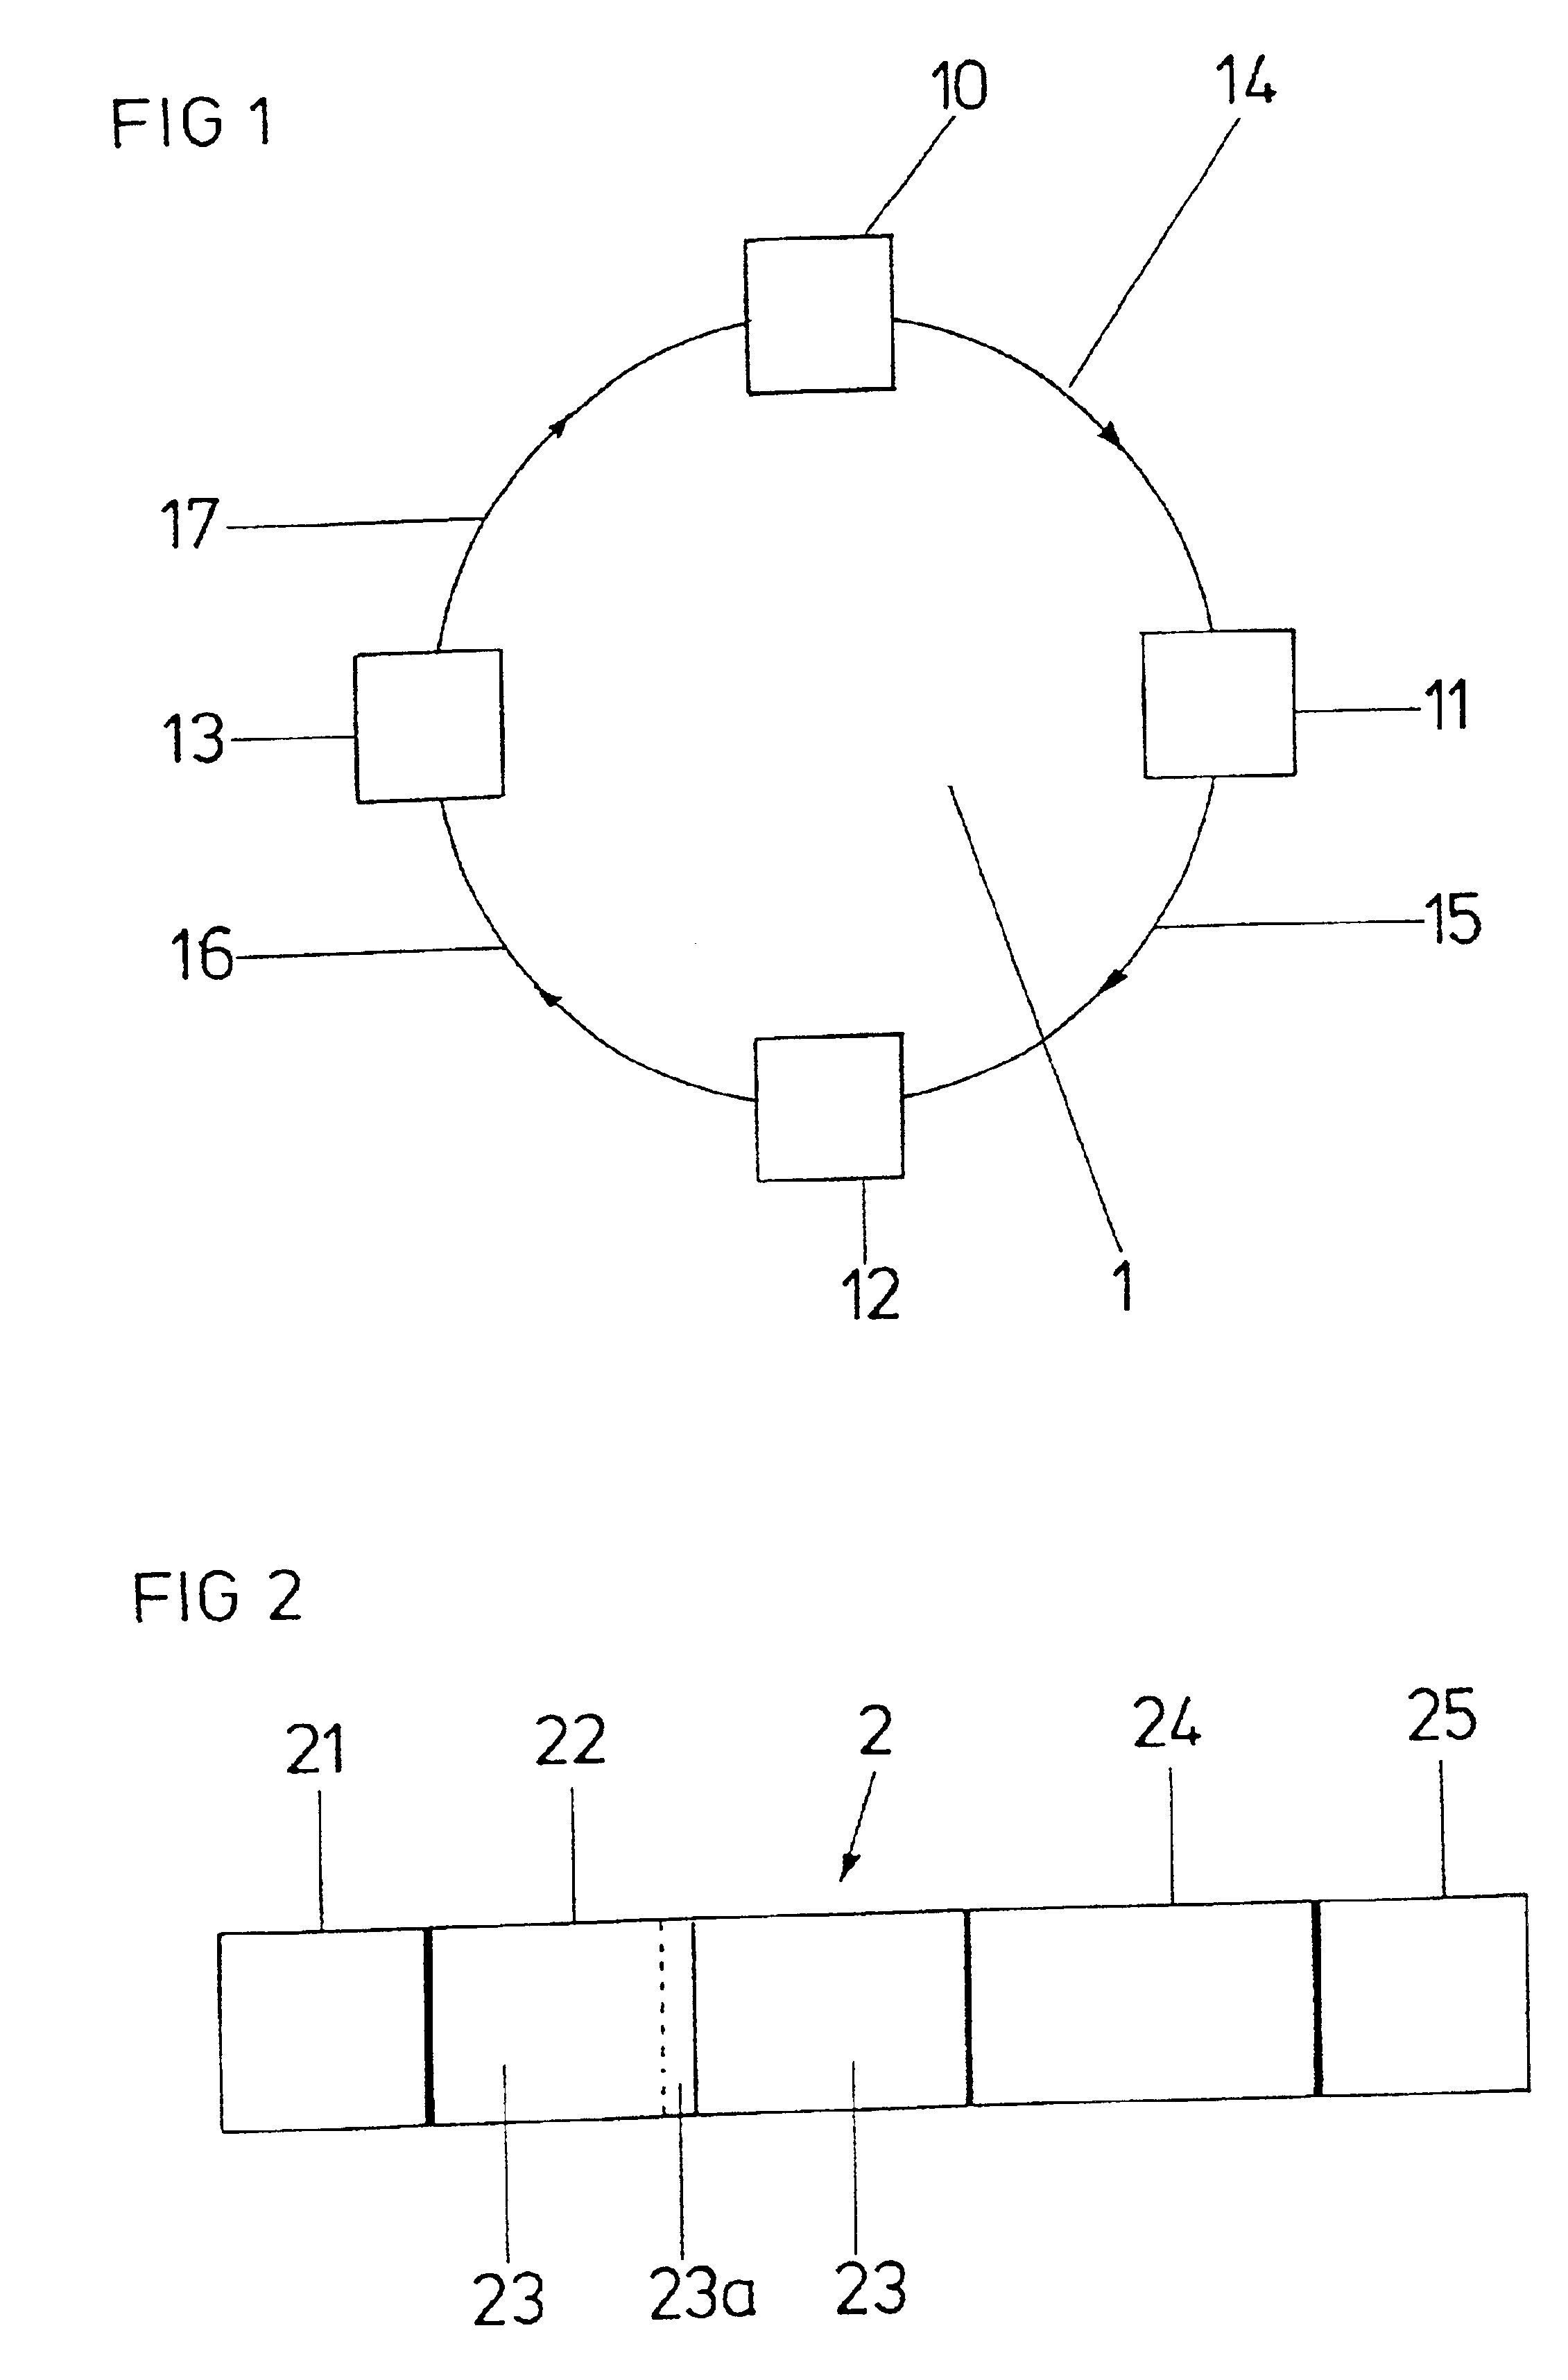 Method of data transmission in a communication network with a ring configuration